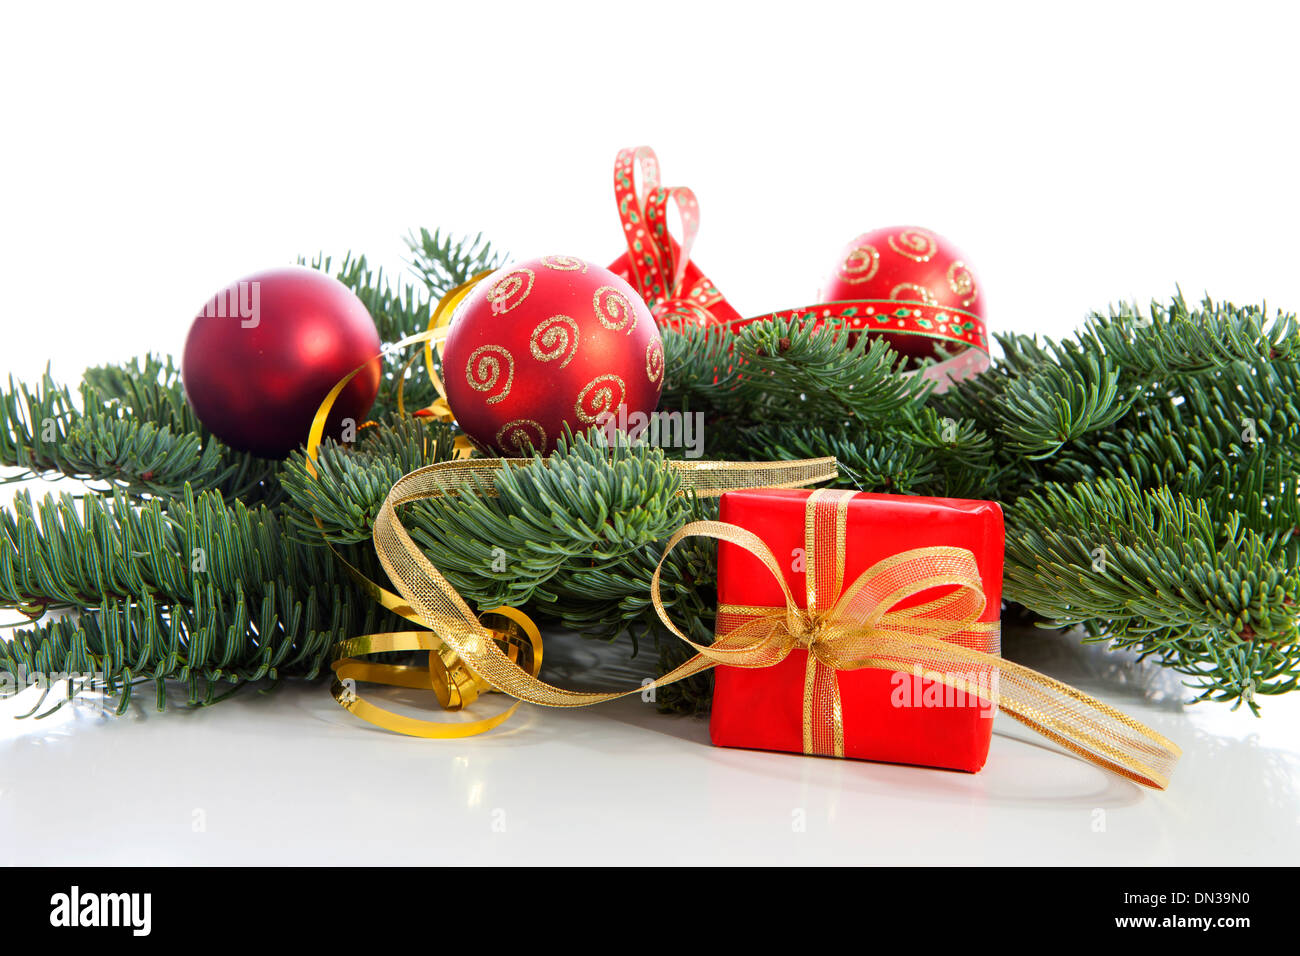 Red Christmas decoration on pine tree over white background Stock Photo